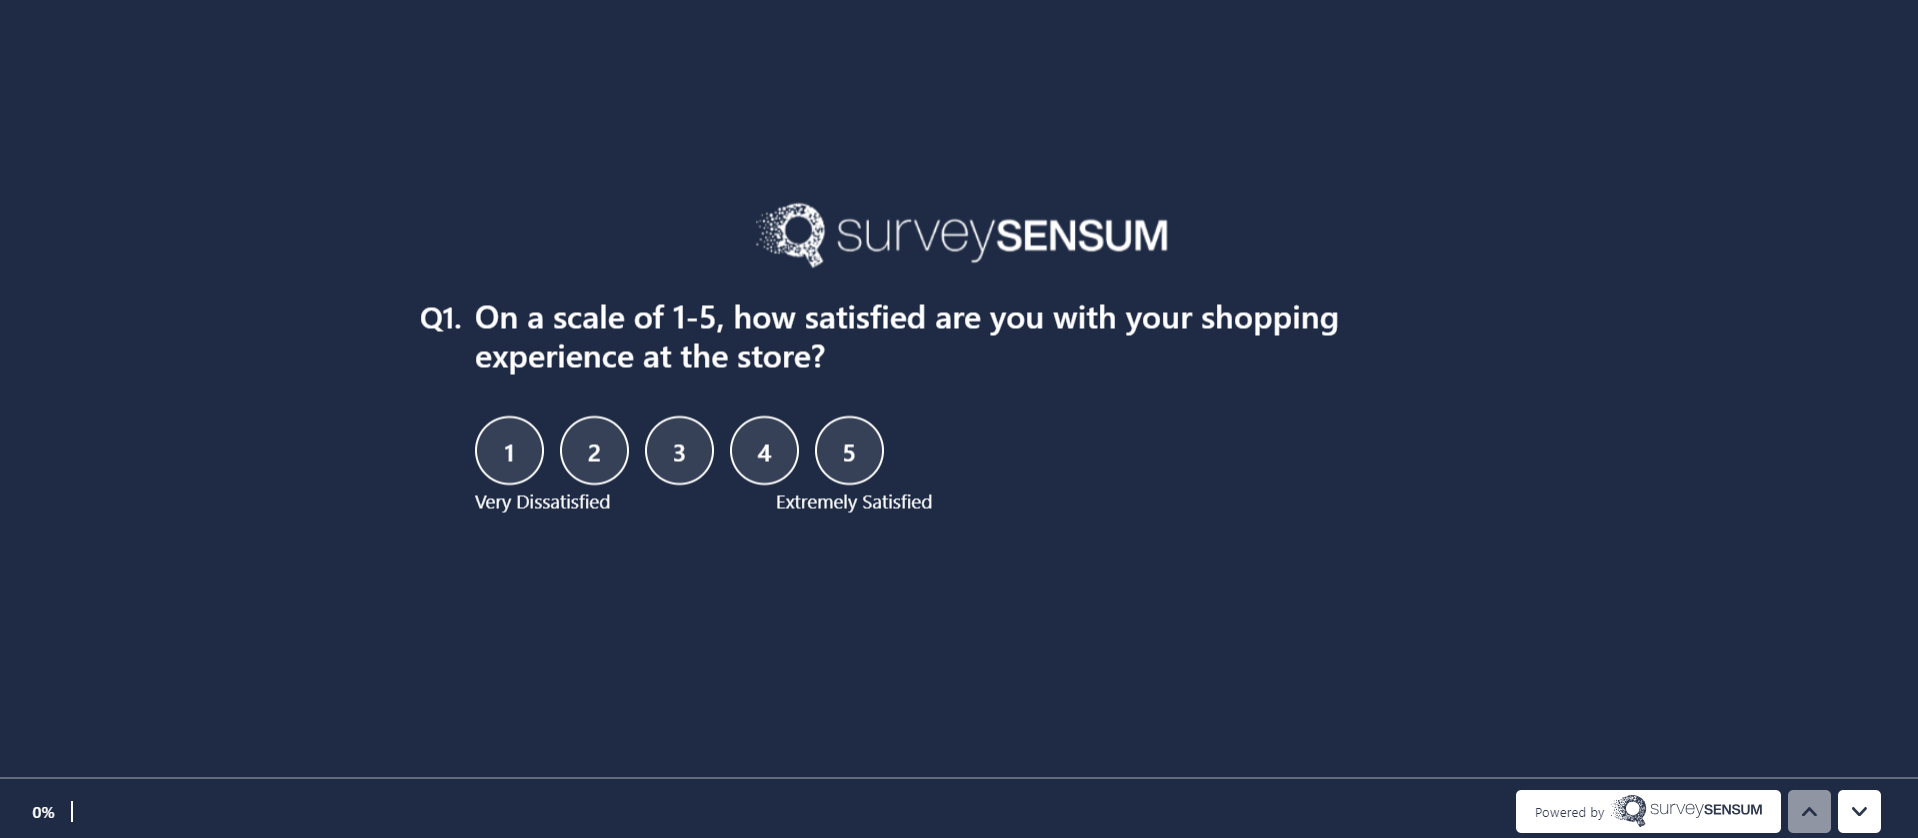 This is the image of a CSAT survey where the customer is being asked to rating the satisfaction with the recent shopping experience on a scale of 1-5. 